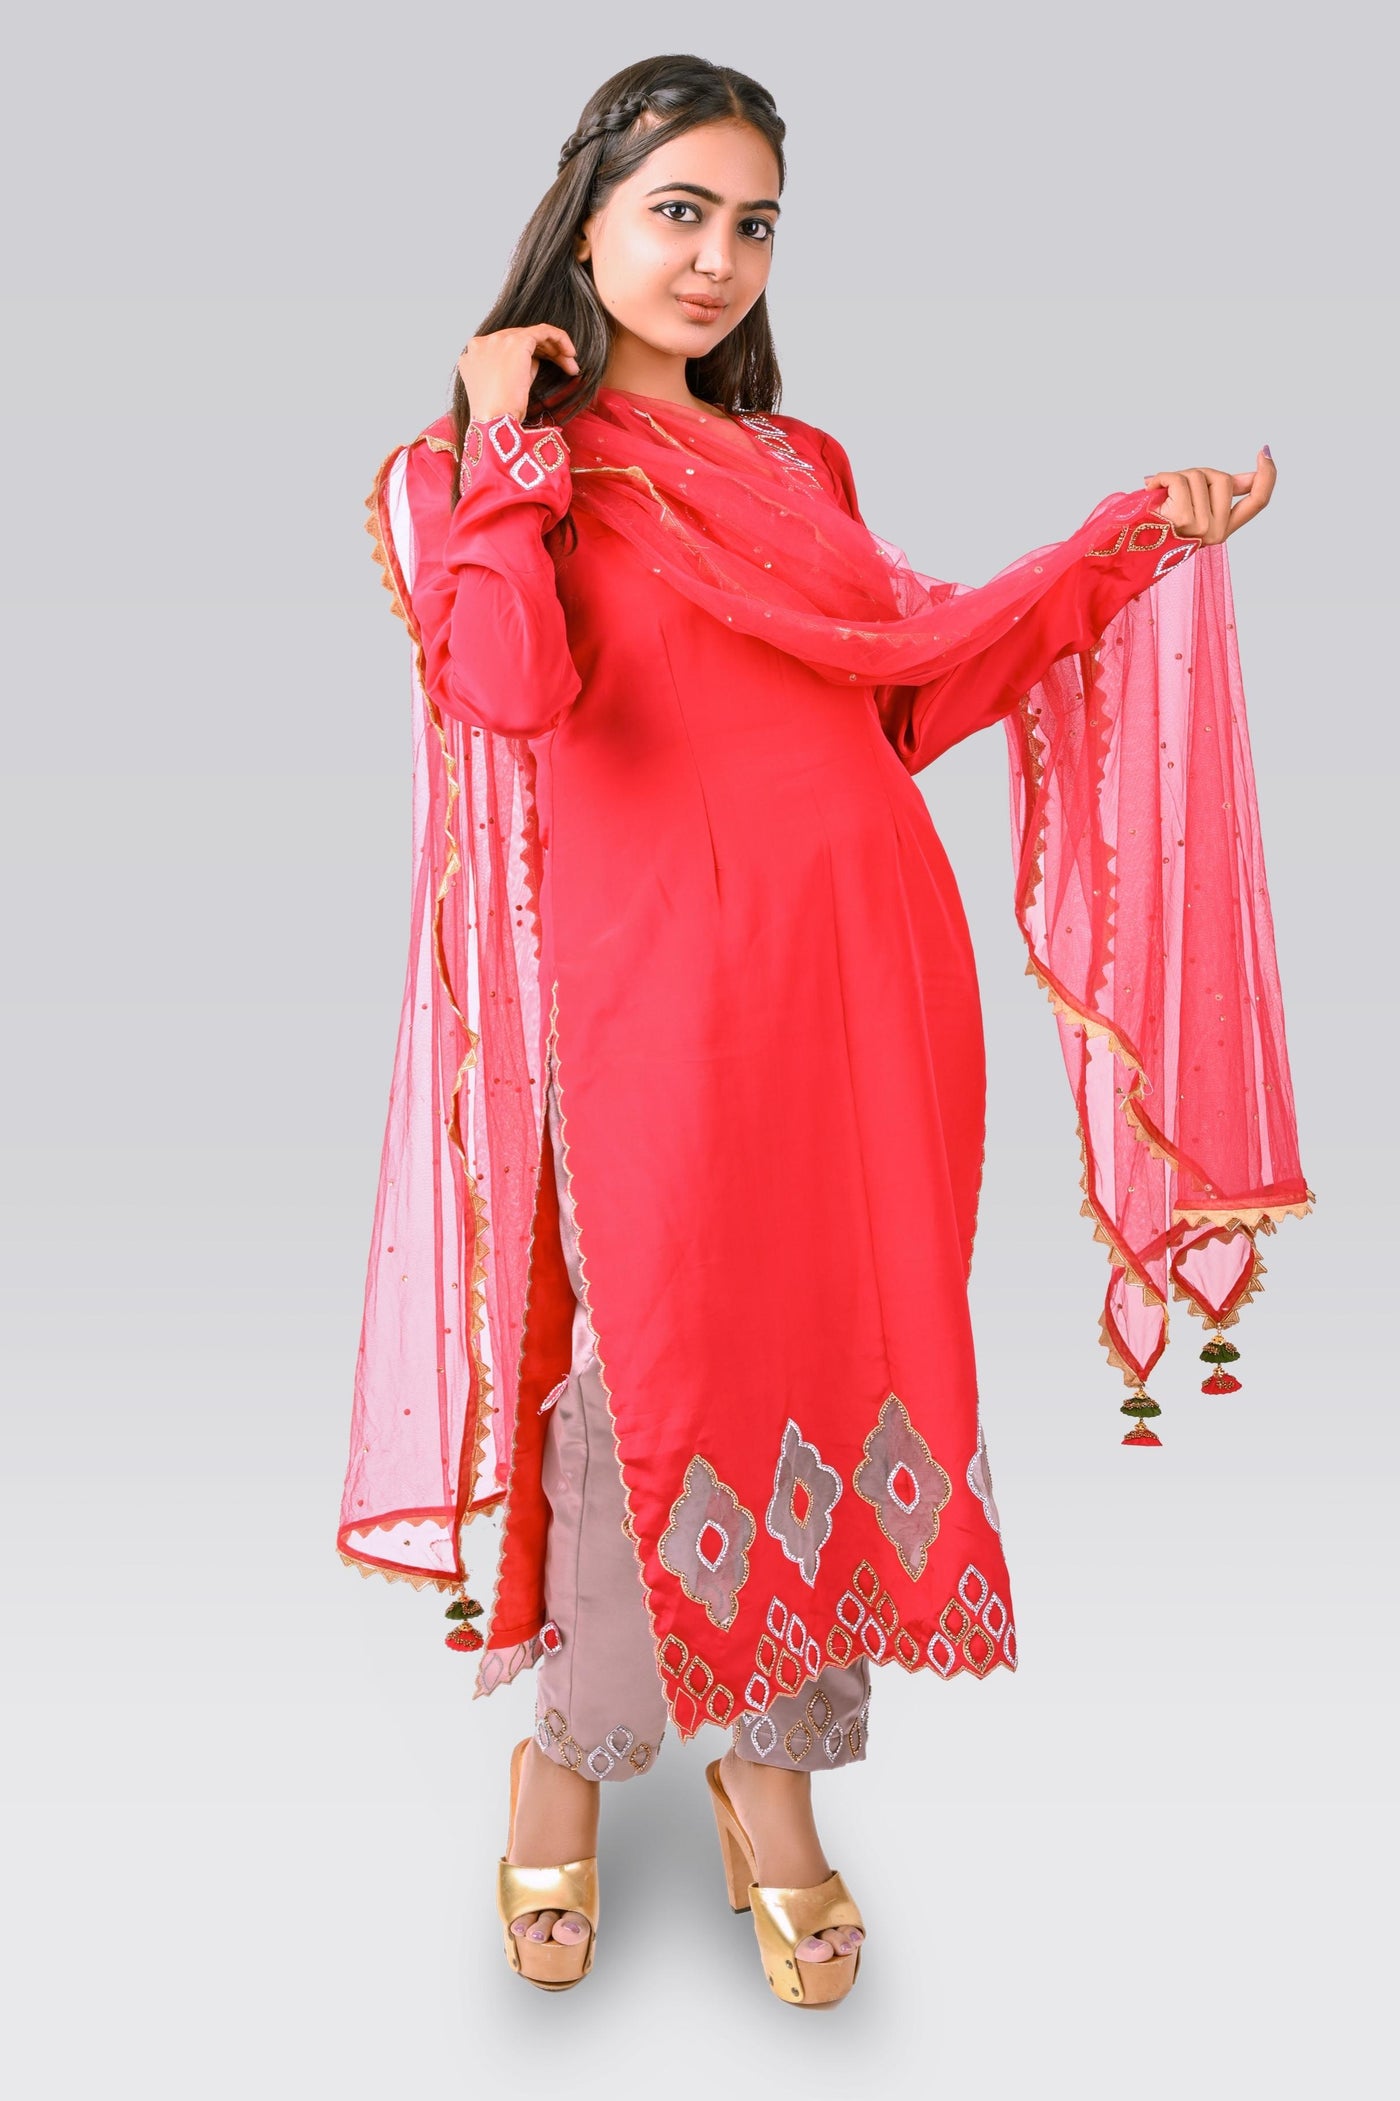 Tomato Crepe Salwar-Kameez - Indian Clothing in Denver, CO, Aurora, CO, Boulder, CO, Fort Collins, CO, Colorado Springs, CO, Parker, CO, Highlands Ranch, CO, Cherry Creek, CO, Centennial, CO, and Longmont, CO. Nationwide shipping USA - India Fashion X